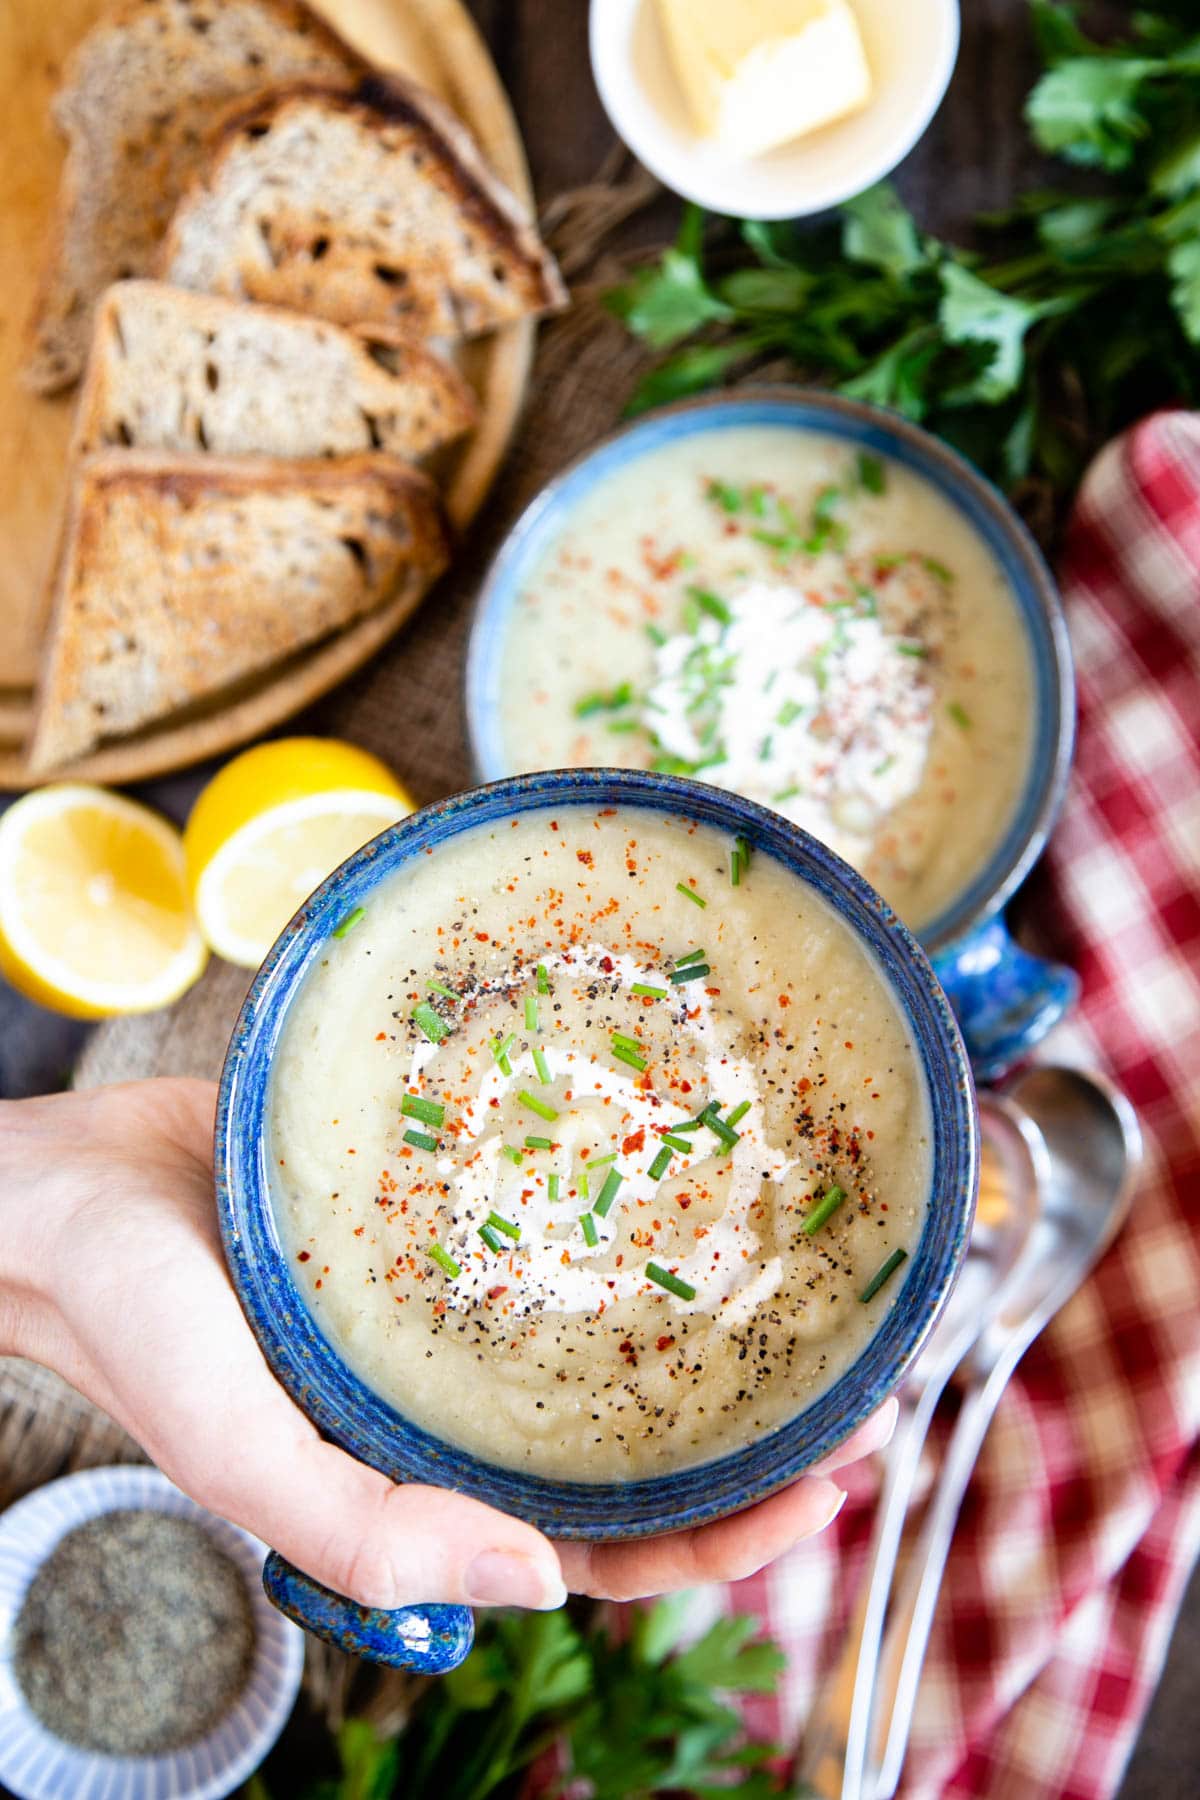 A warming bowl of celeriac soup held up to the viewer; it is prettily garnished and served with toast.